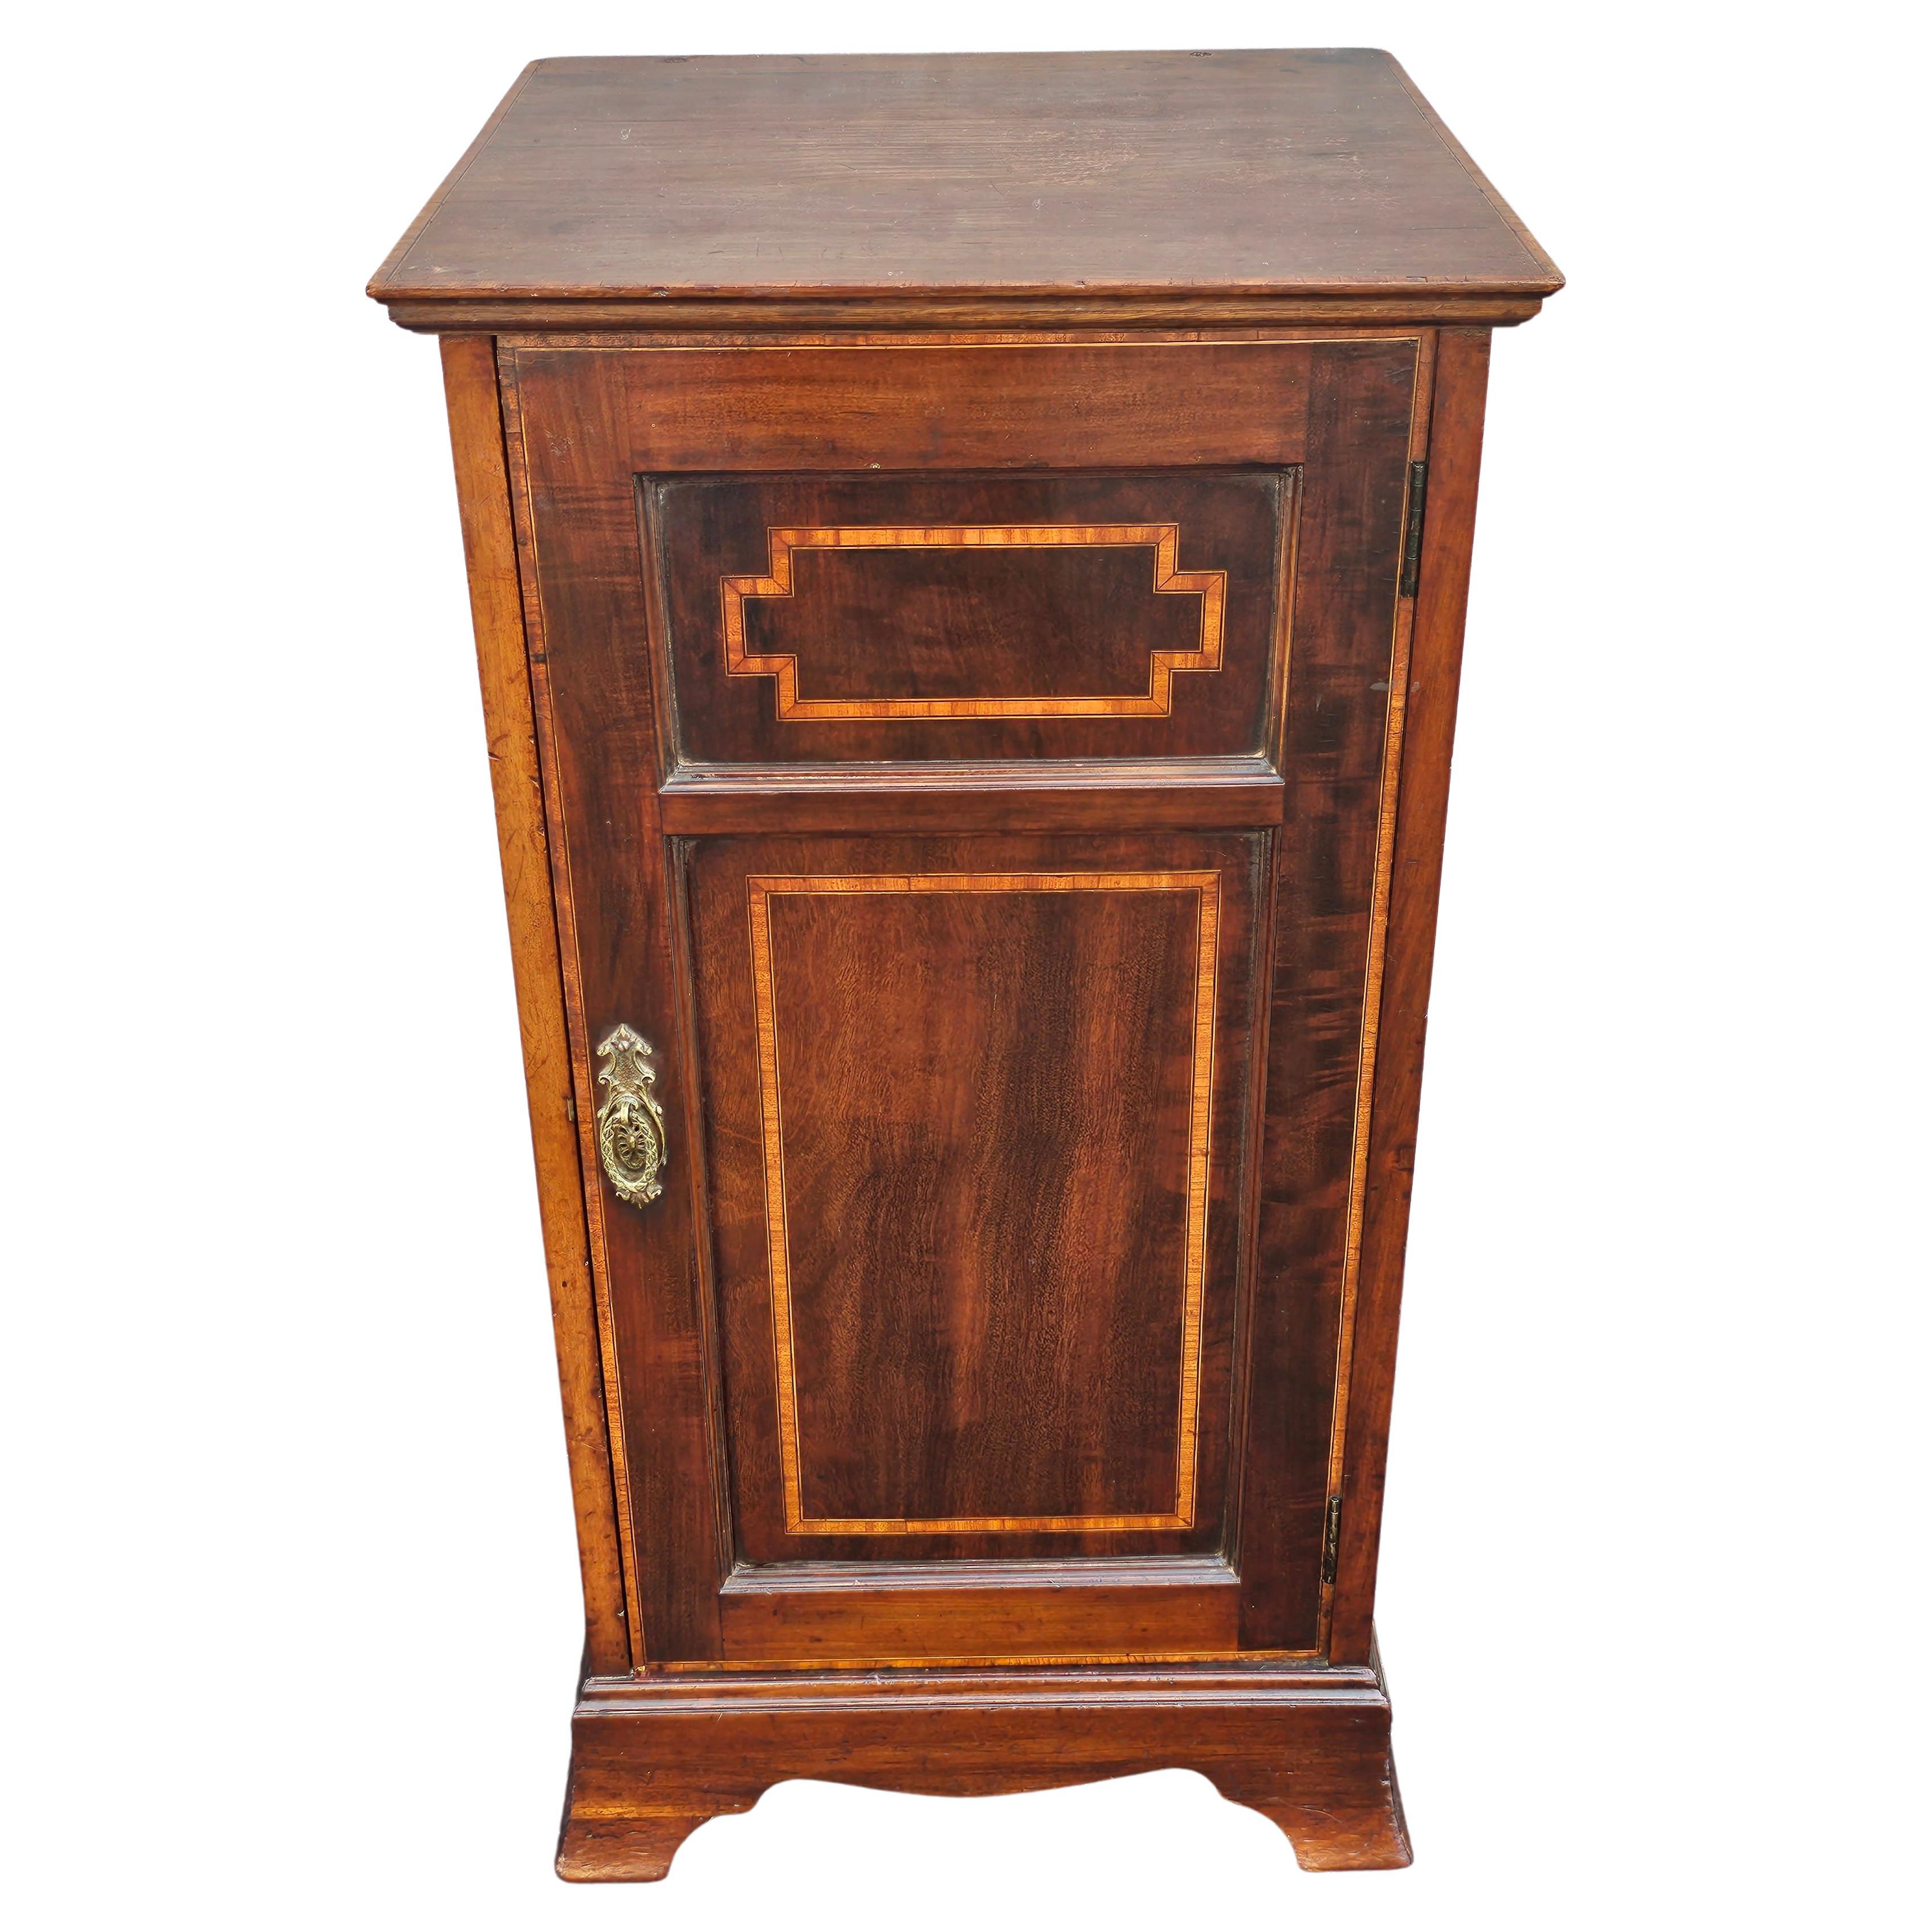 An exquisite late 19th Century Mahogany and Satinwood Inlay Cabinet and Stand with pine wood backing. Measures  16